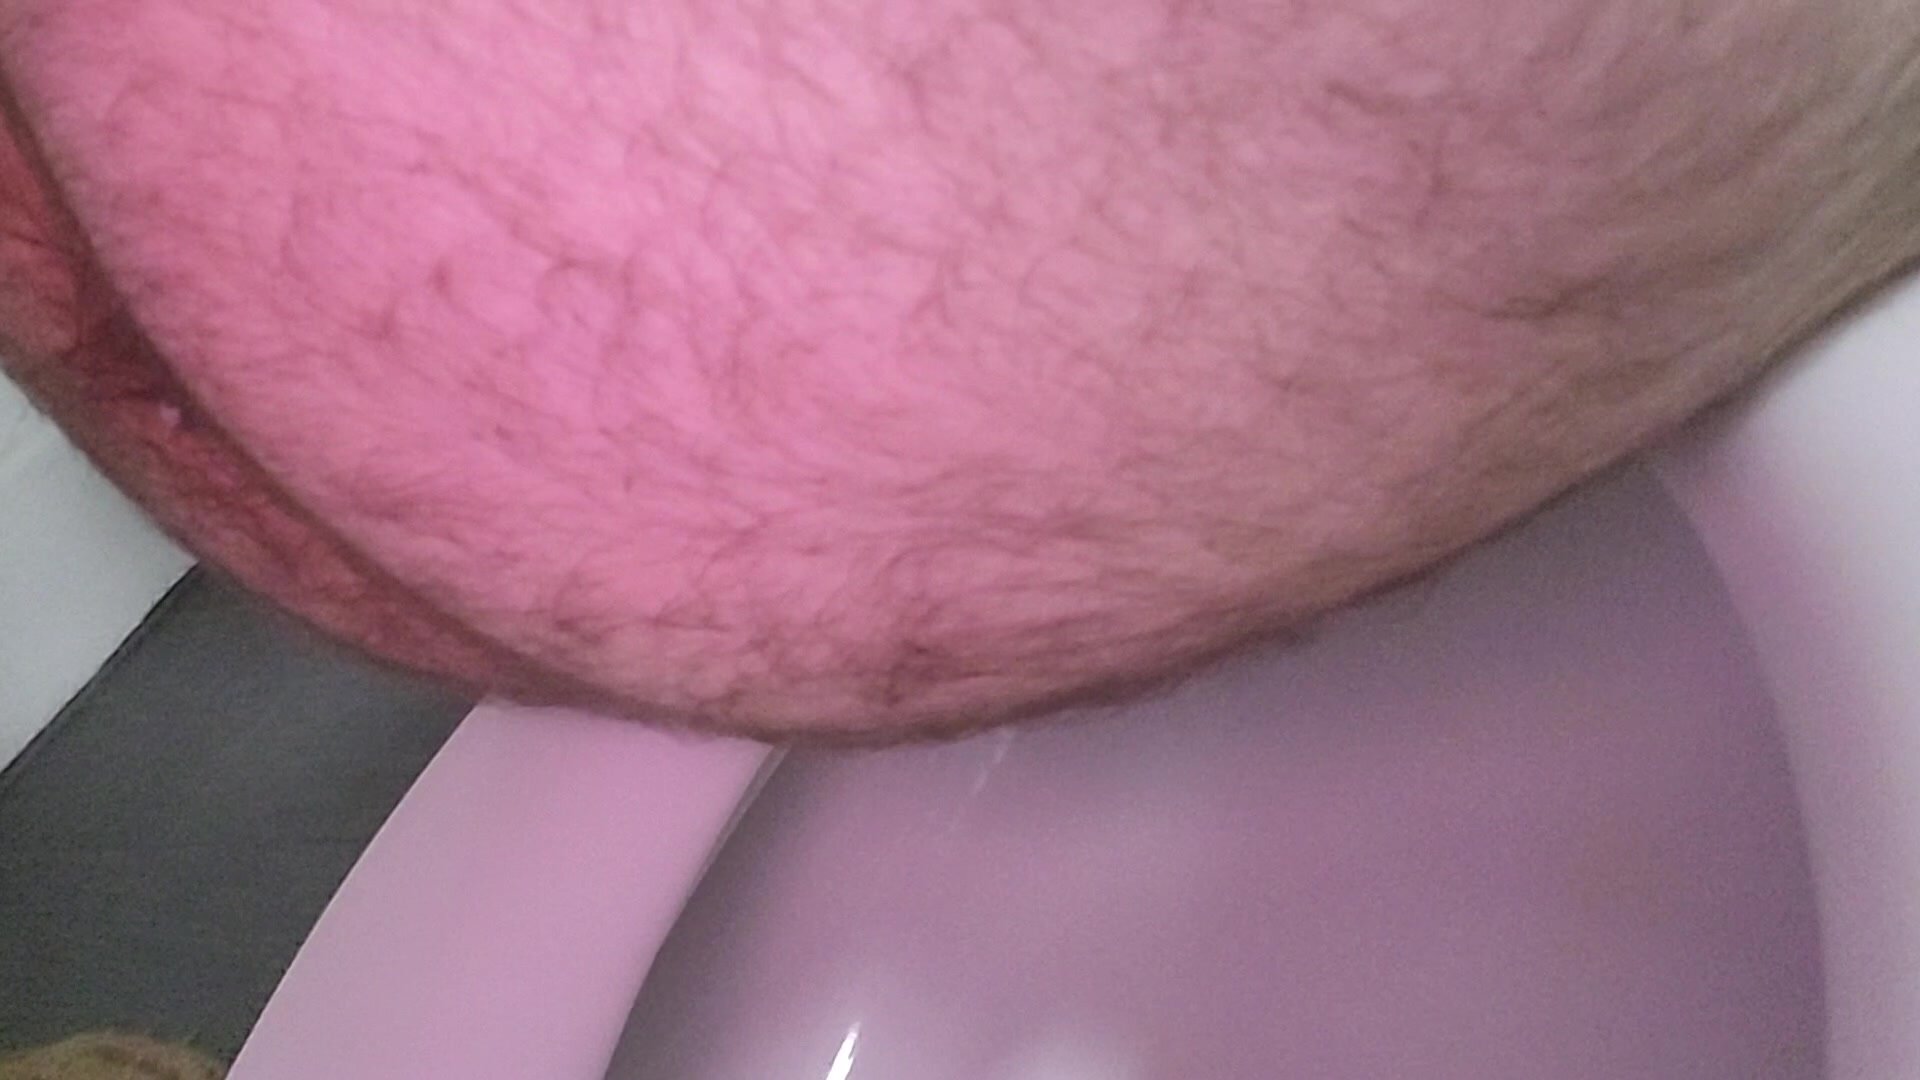 Toilet poop (Back, ass view)